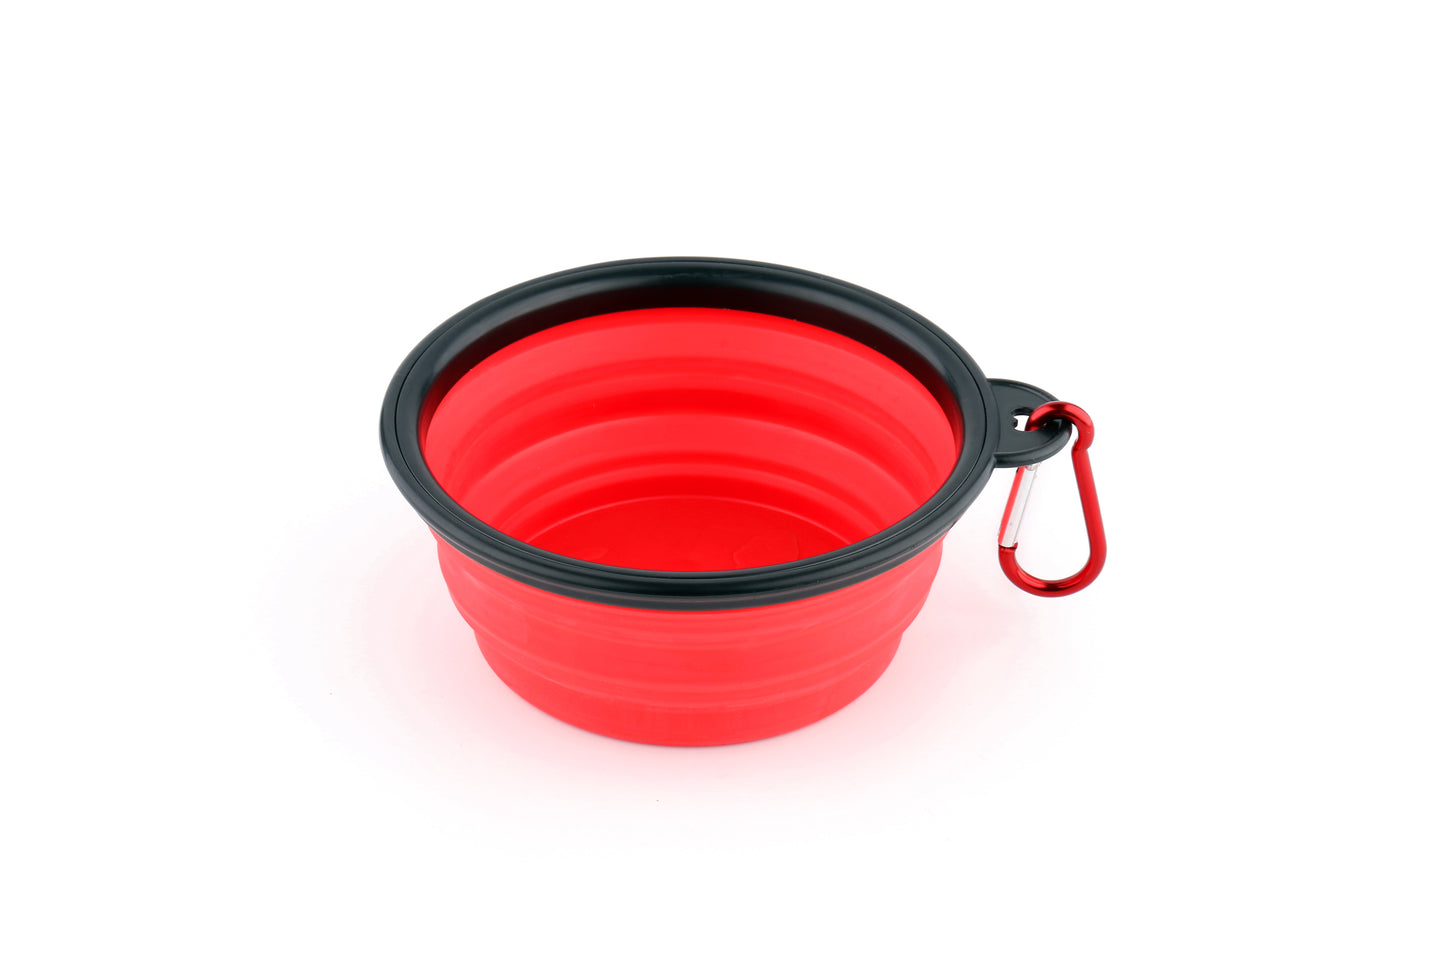 Collapsible dog bowl for food and drink